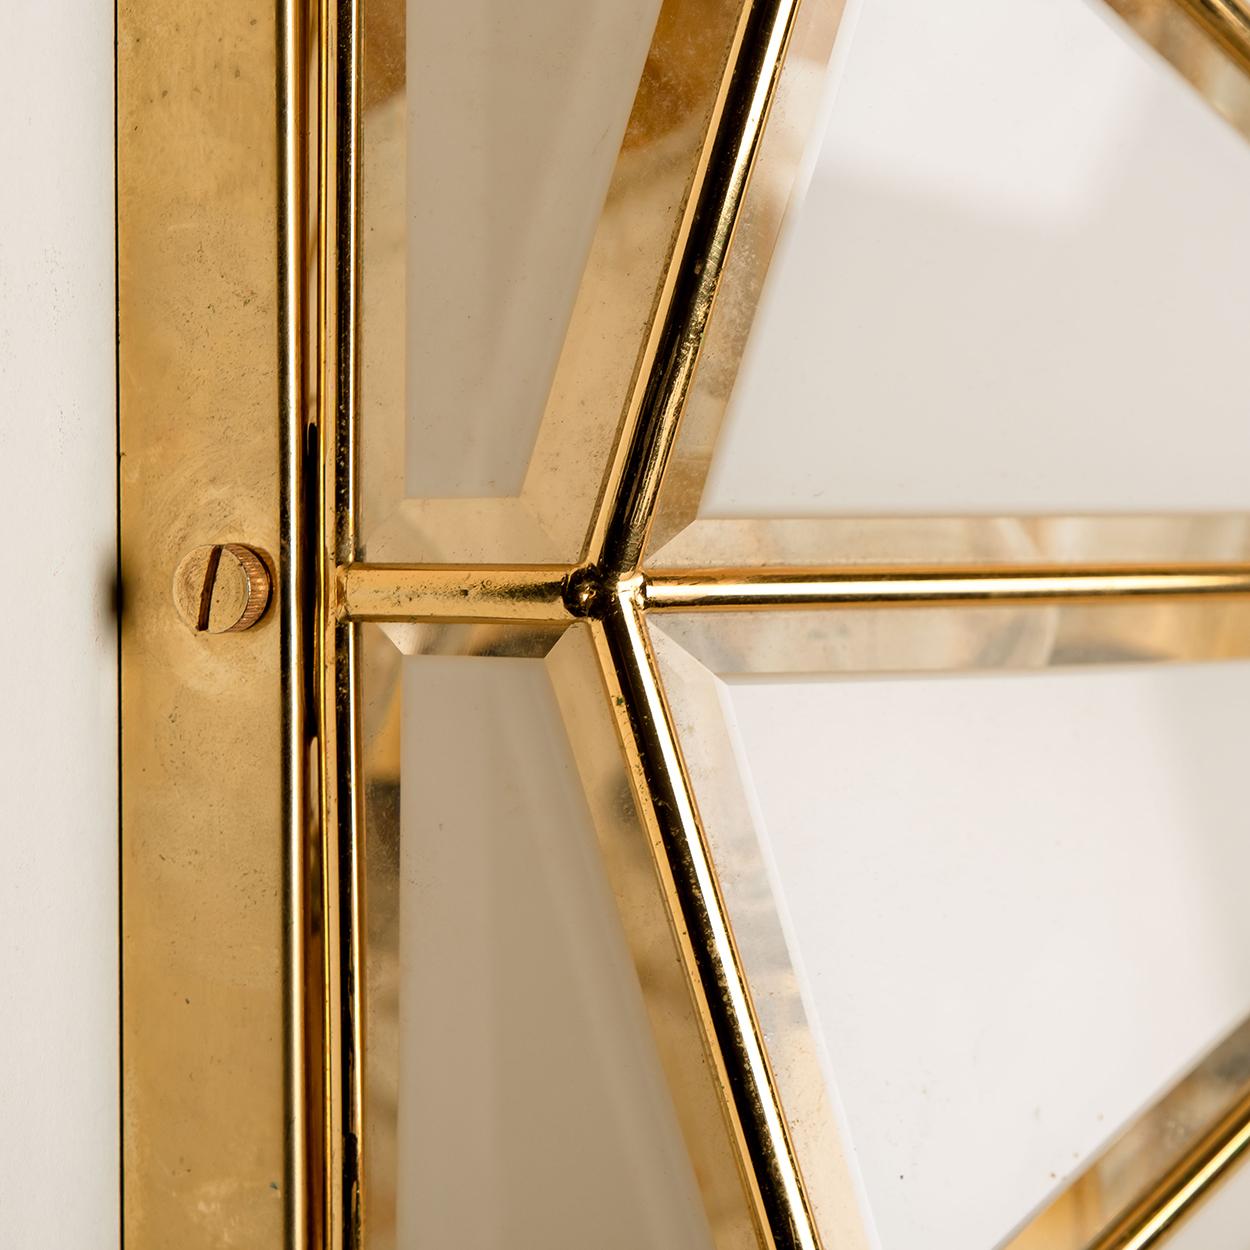 This beautiful and unique octagonal glass light flush mount or wall light is manufactured in Germany during the 1970s, (early 1970s). Nice craftsmanship. Minimal, geometric and simply shaped design. Opal glass with brass frame.

Designed as